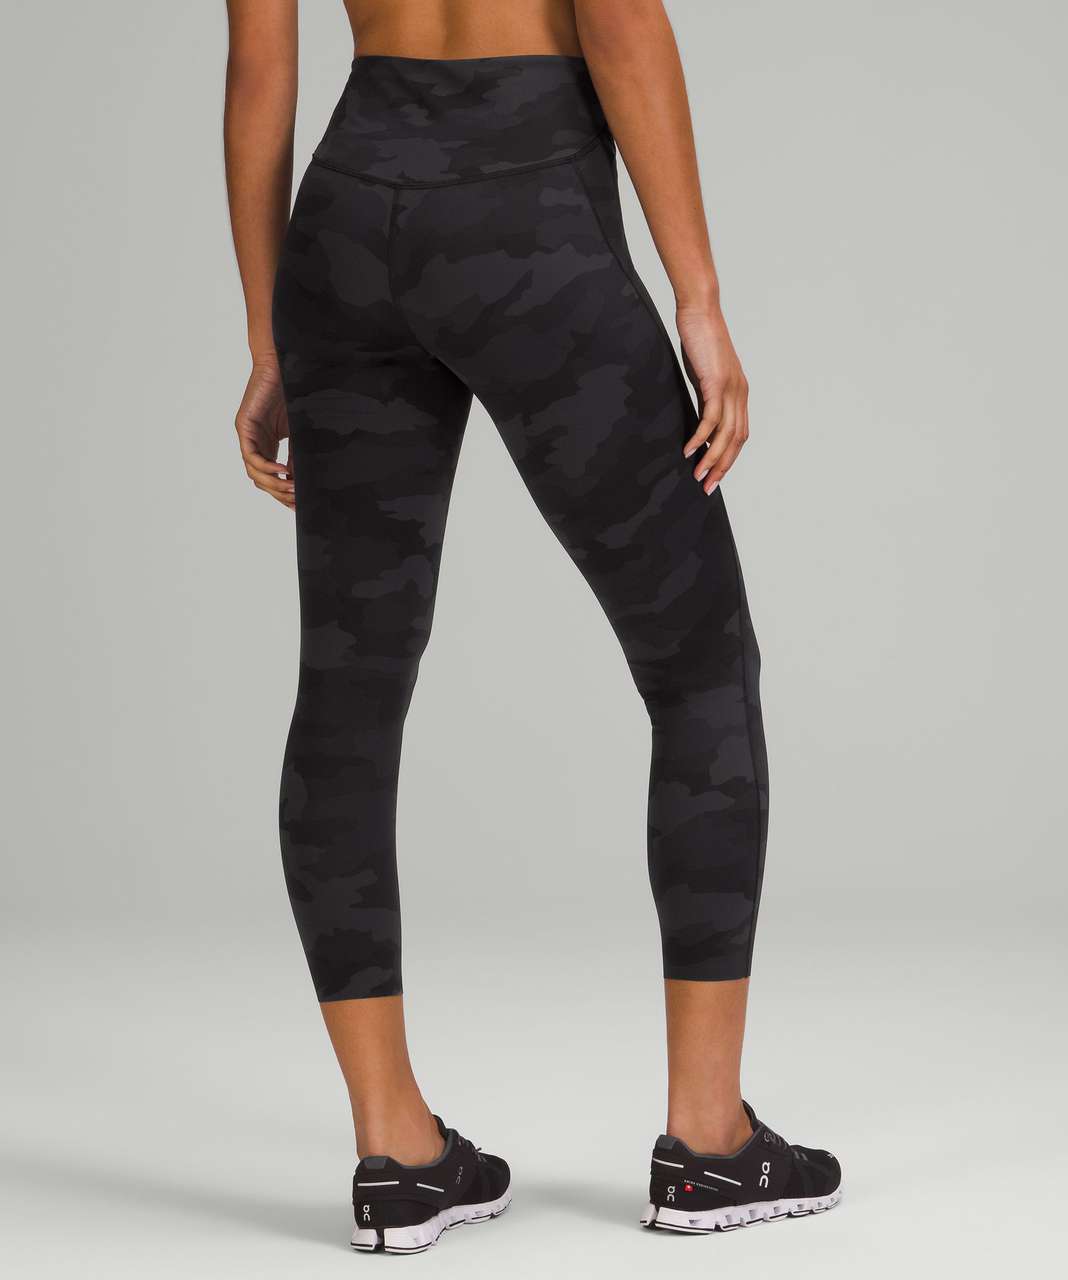 LULULEMON BASE PACE HIGH-RISE TIGHTS 25” IN BLACK WOMEN'S SIZE 12